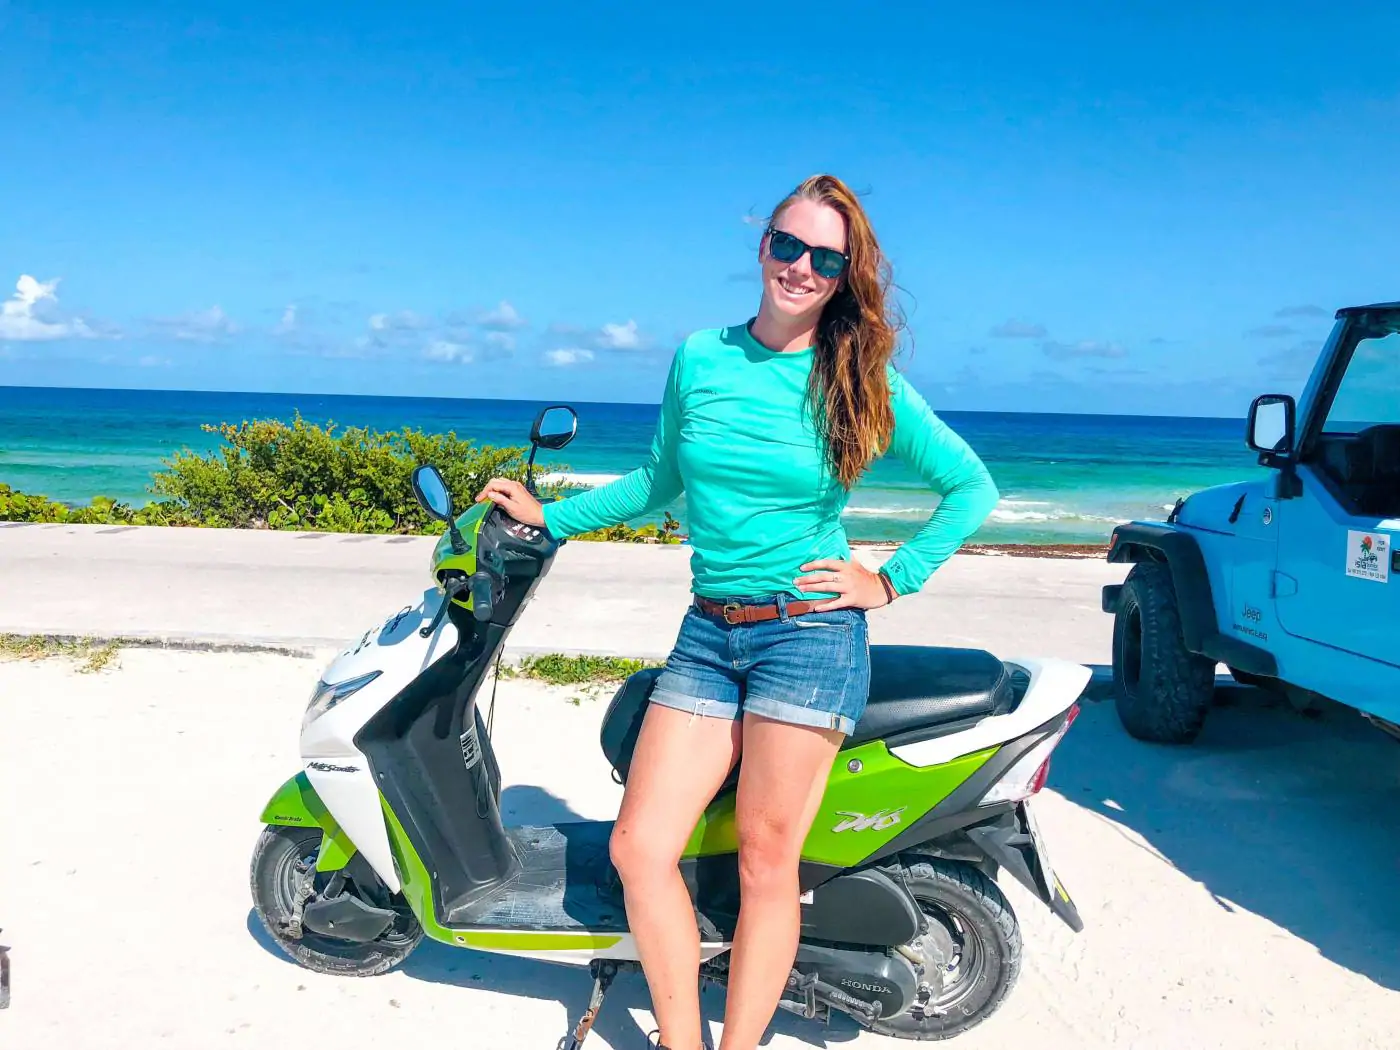 Riding a Scooter on Cozumel Island in Mexico - Just Chasing Sunsets